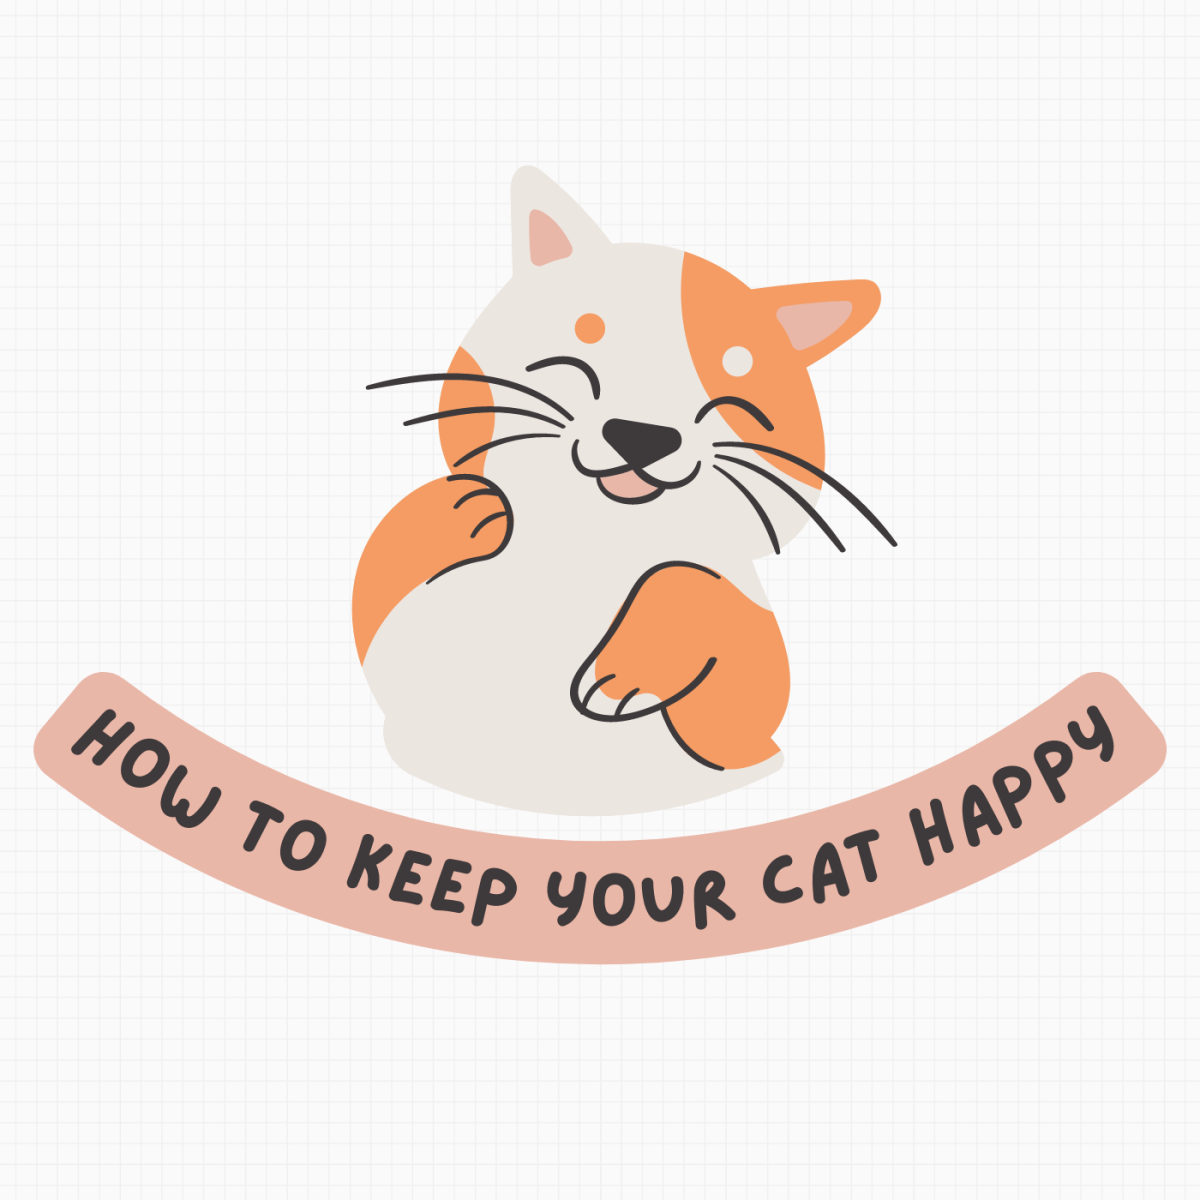 tips-on-keeping-your-cat-happy